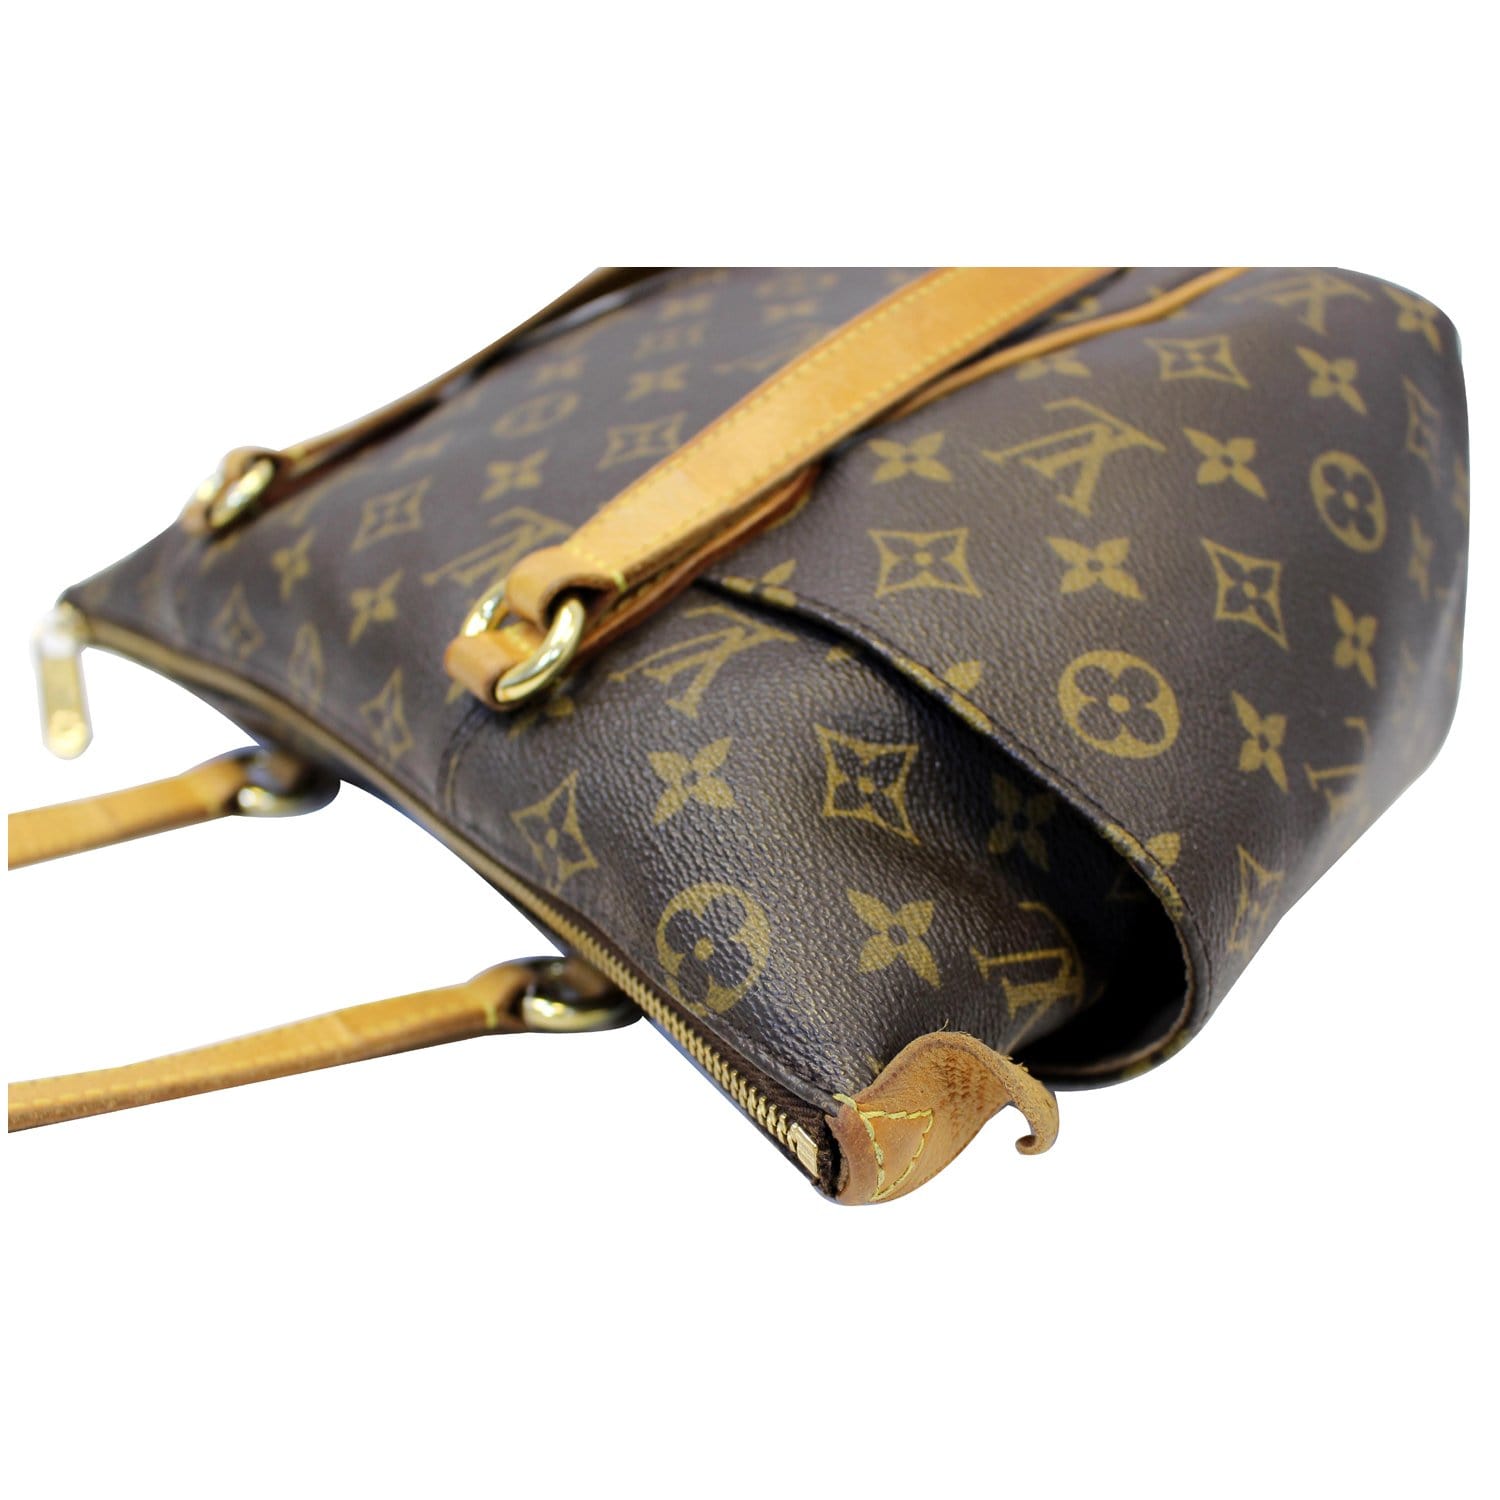 Pre-owned Louis Vuitton 2009 Totally Pm Shoulder Bag In Brown